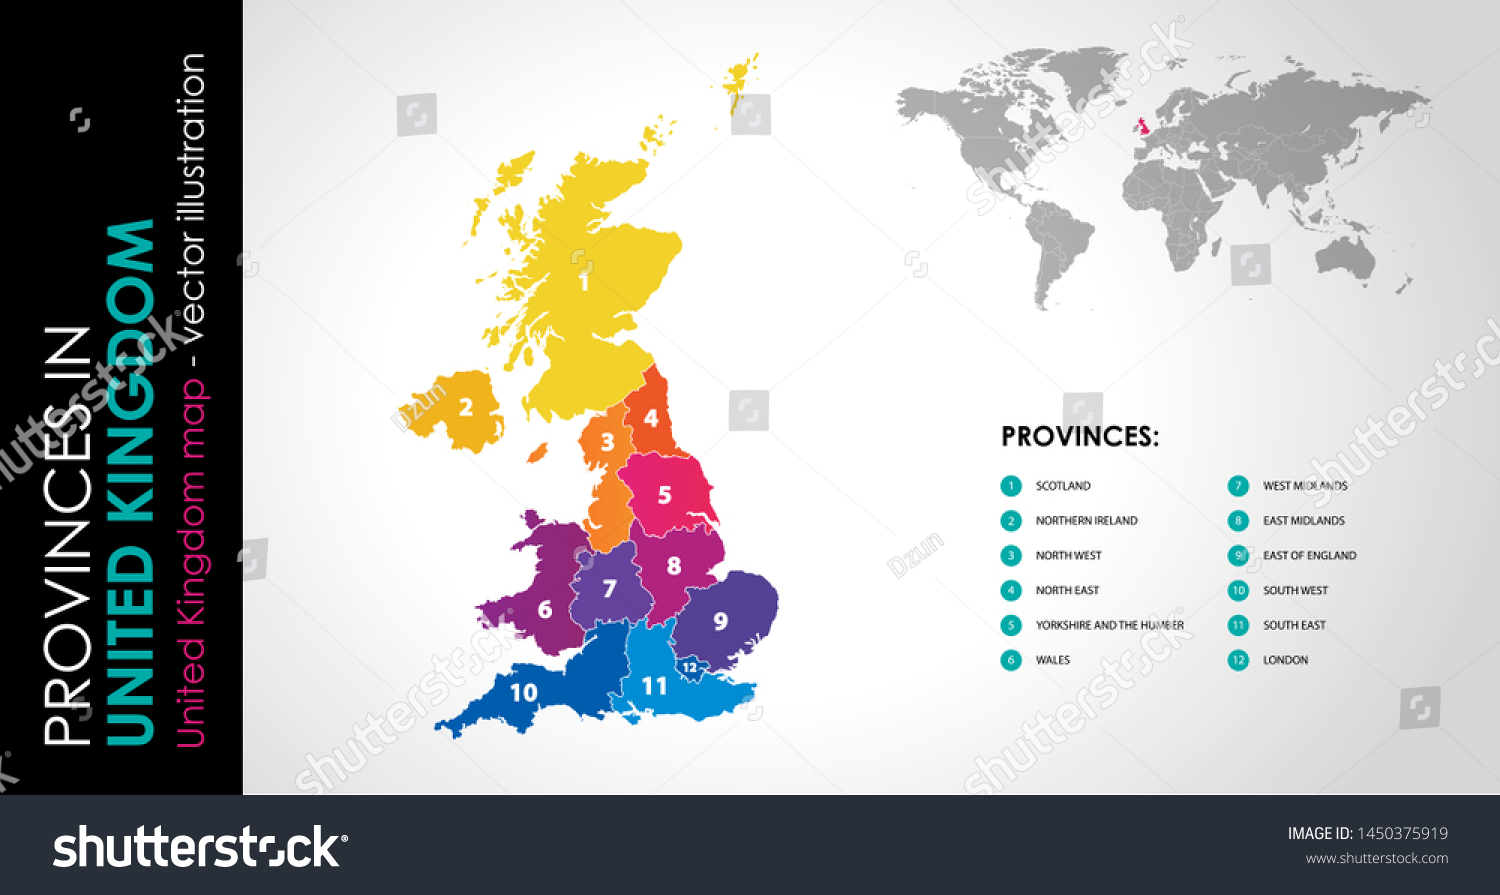 SVG of Vector map of United Kingdom and provinces COLOR svg